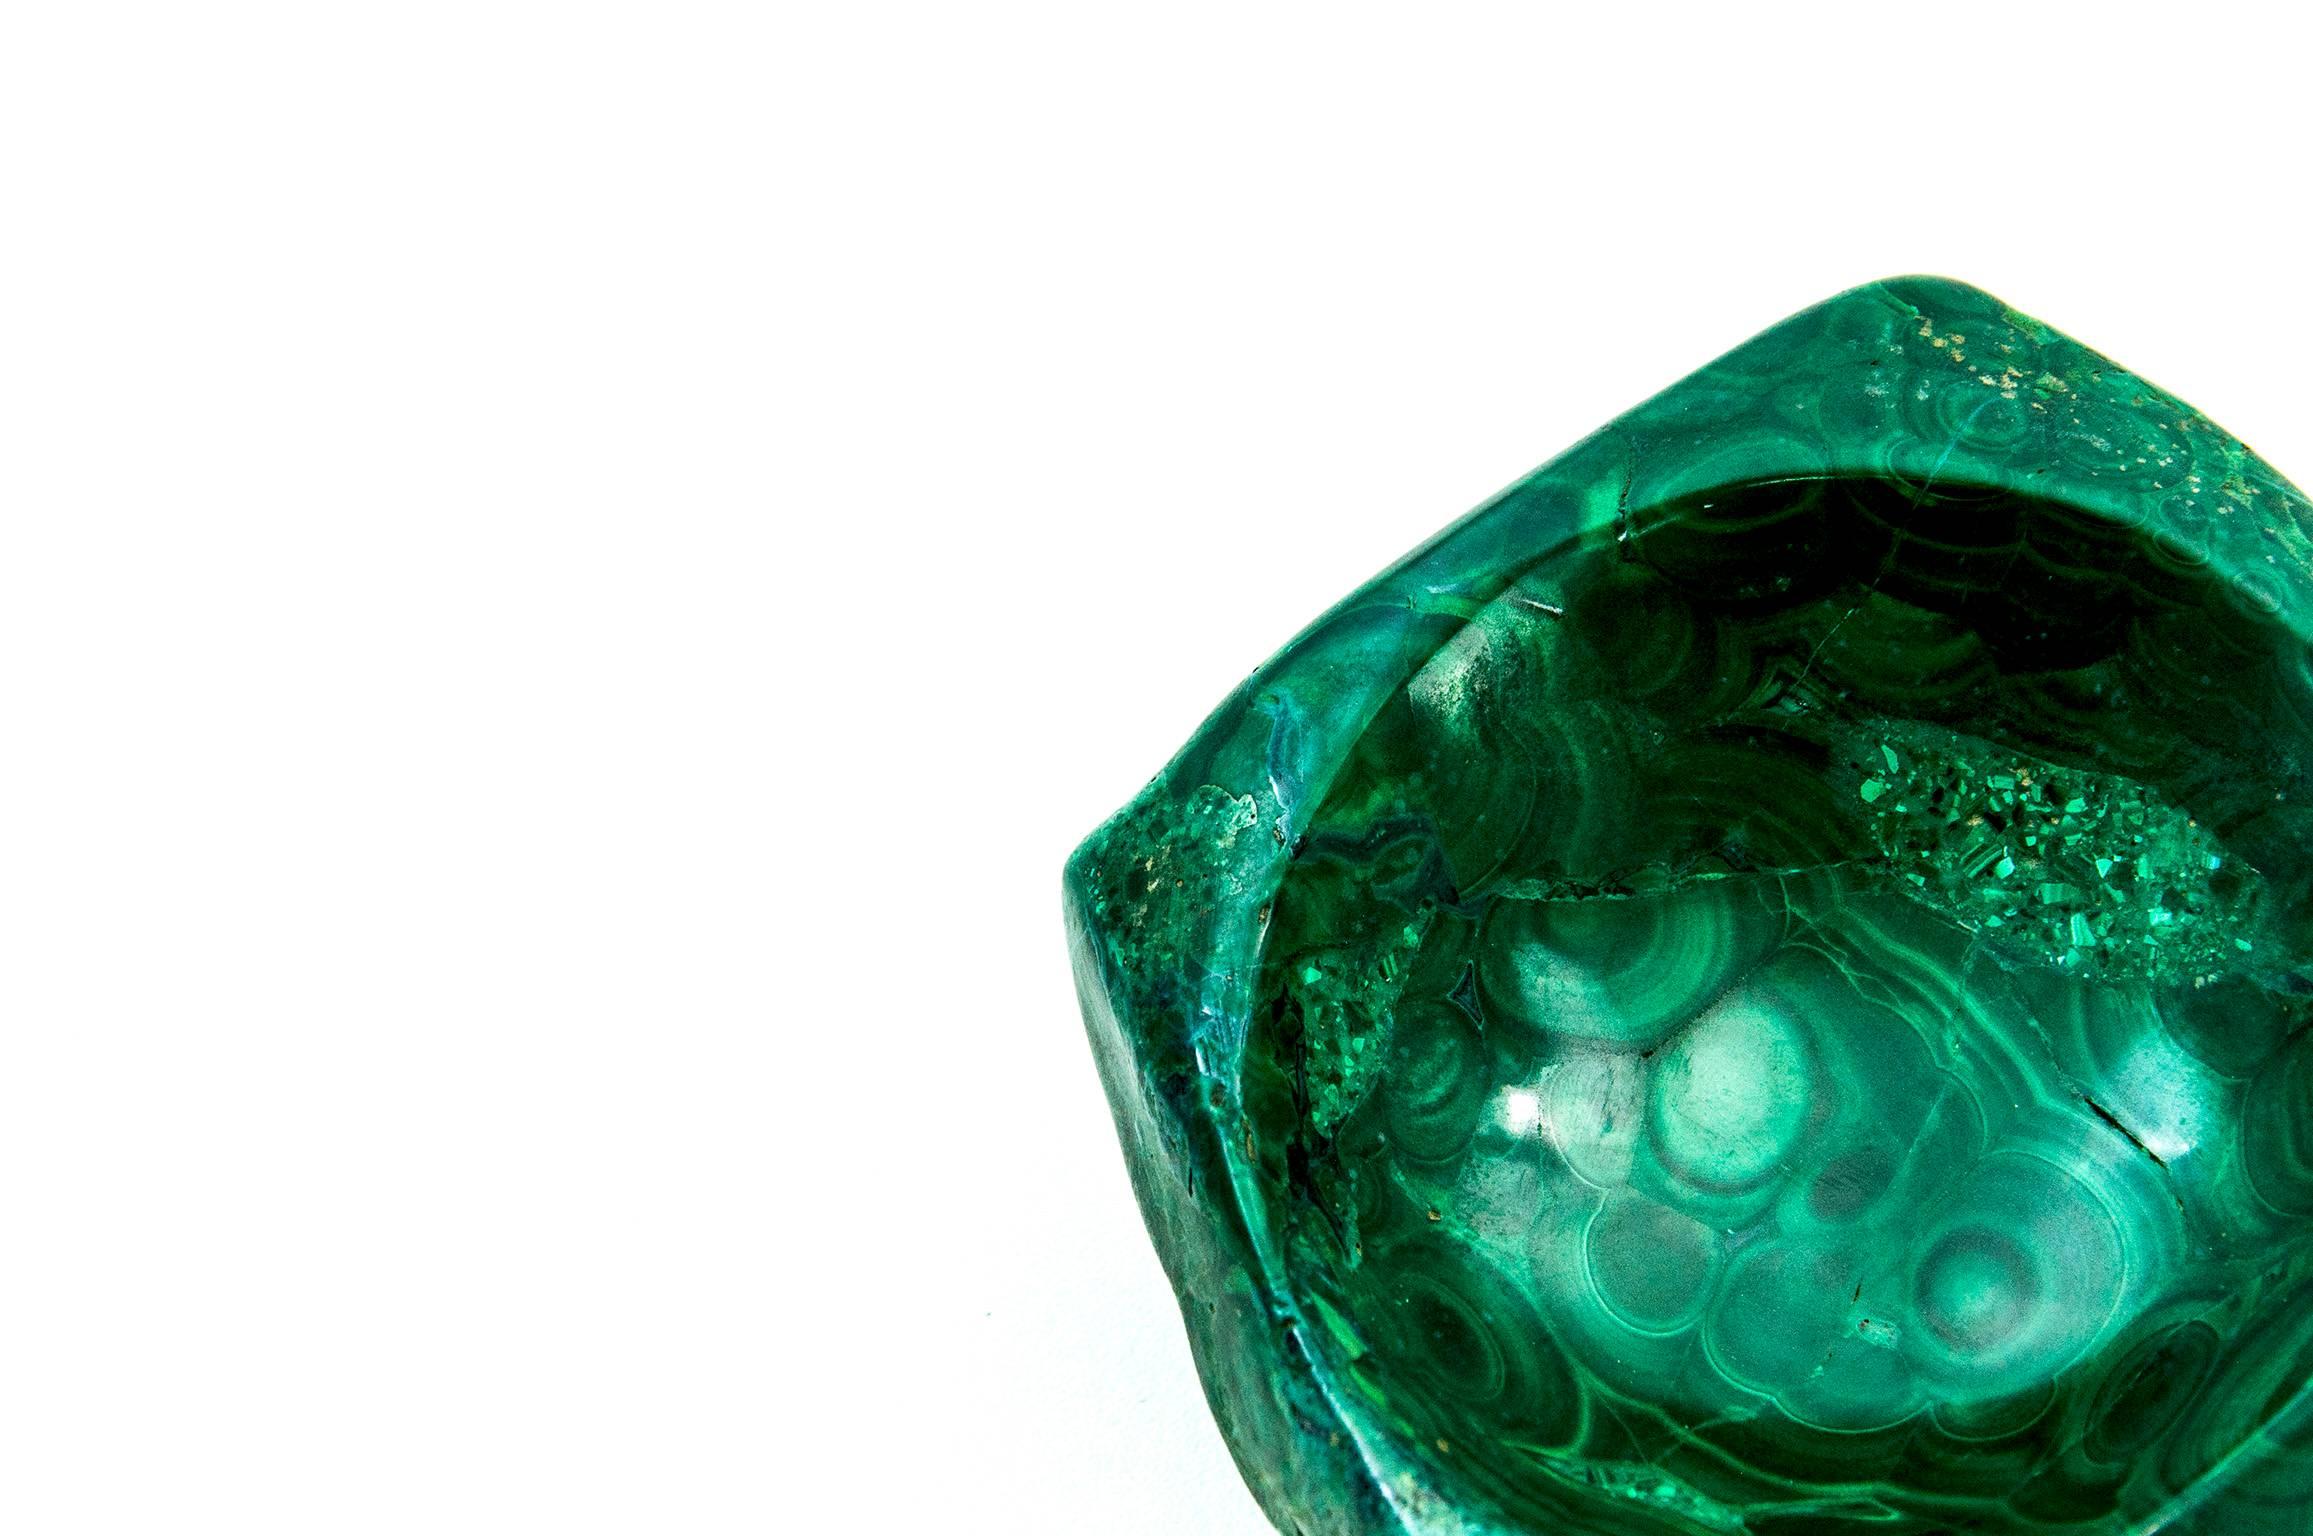 These peace is an decorative object in Malachite. In can be used as an ashtray or a bowl.